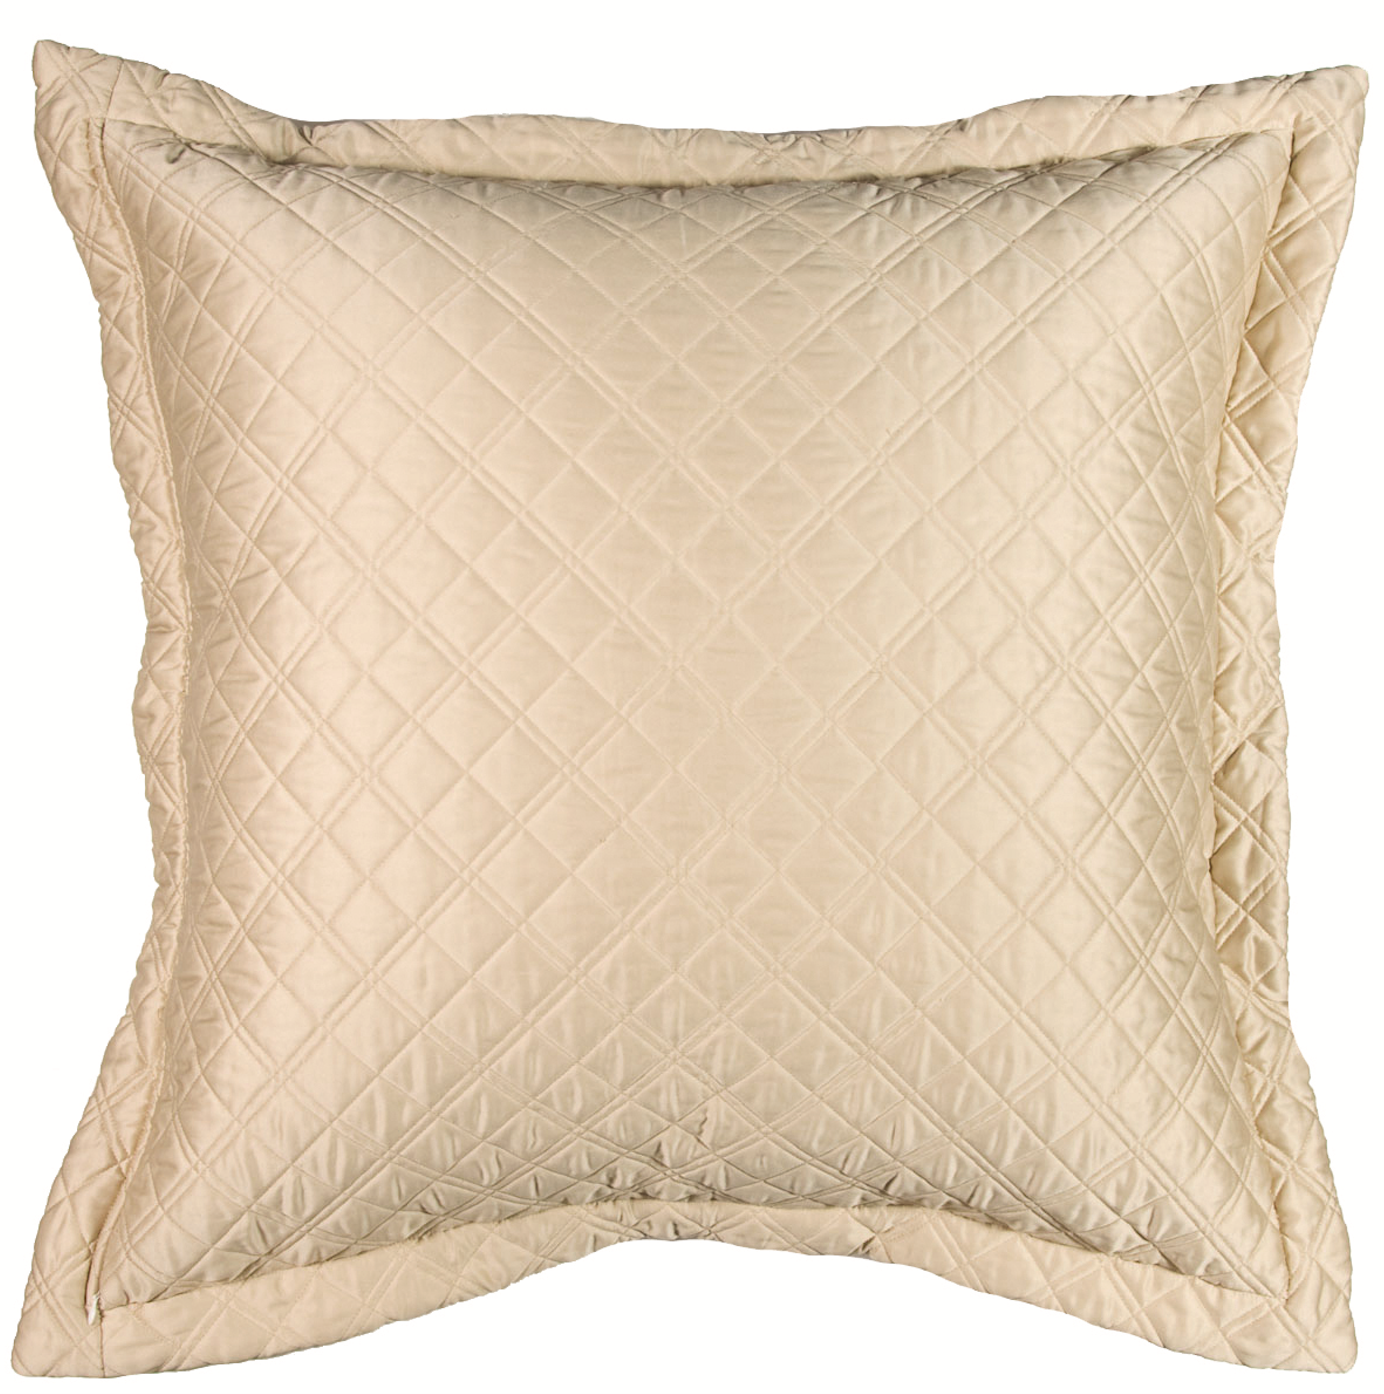 Silk & Sensibility Ivory and Ecru Quilted Coverlets - Lili Alessandra Euro Pillow Reverse - Side B